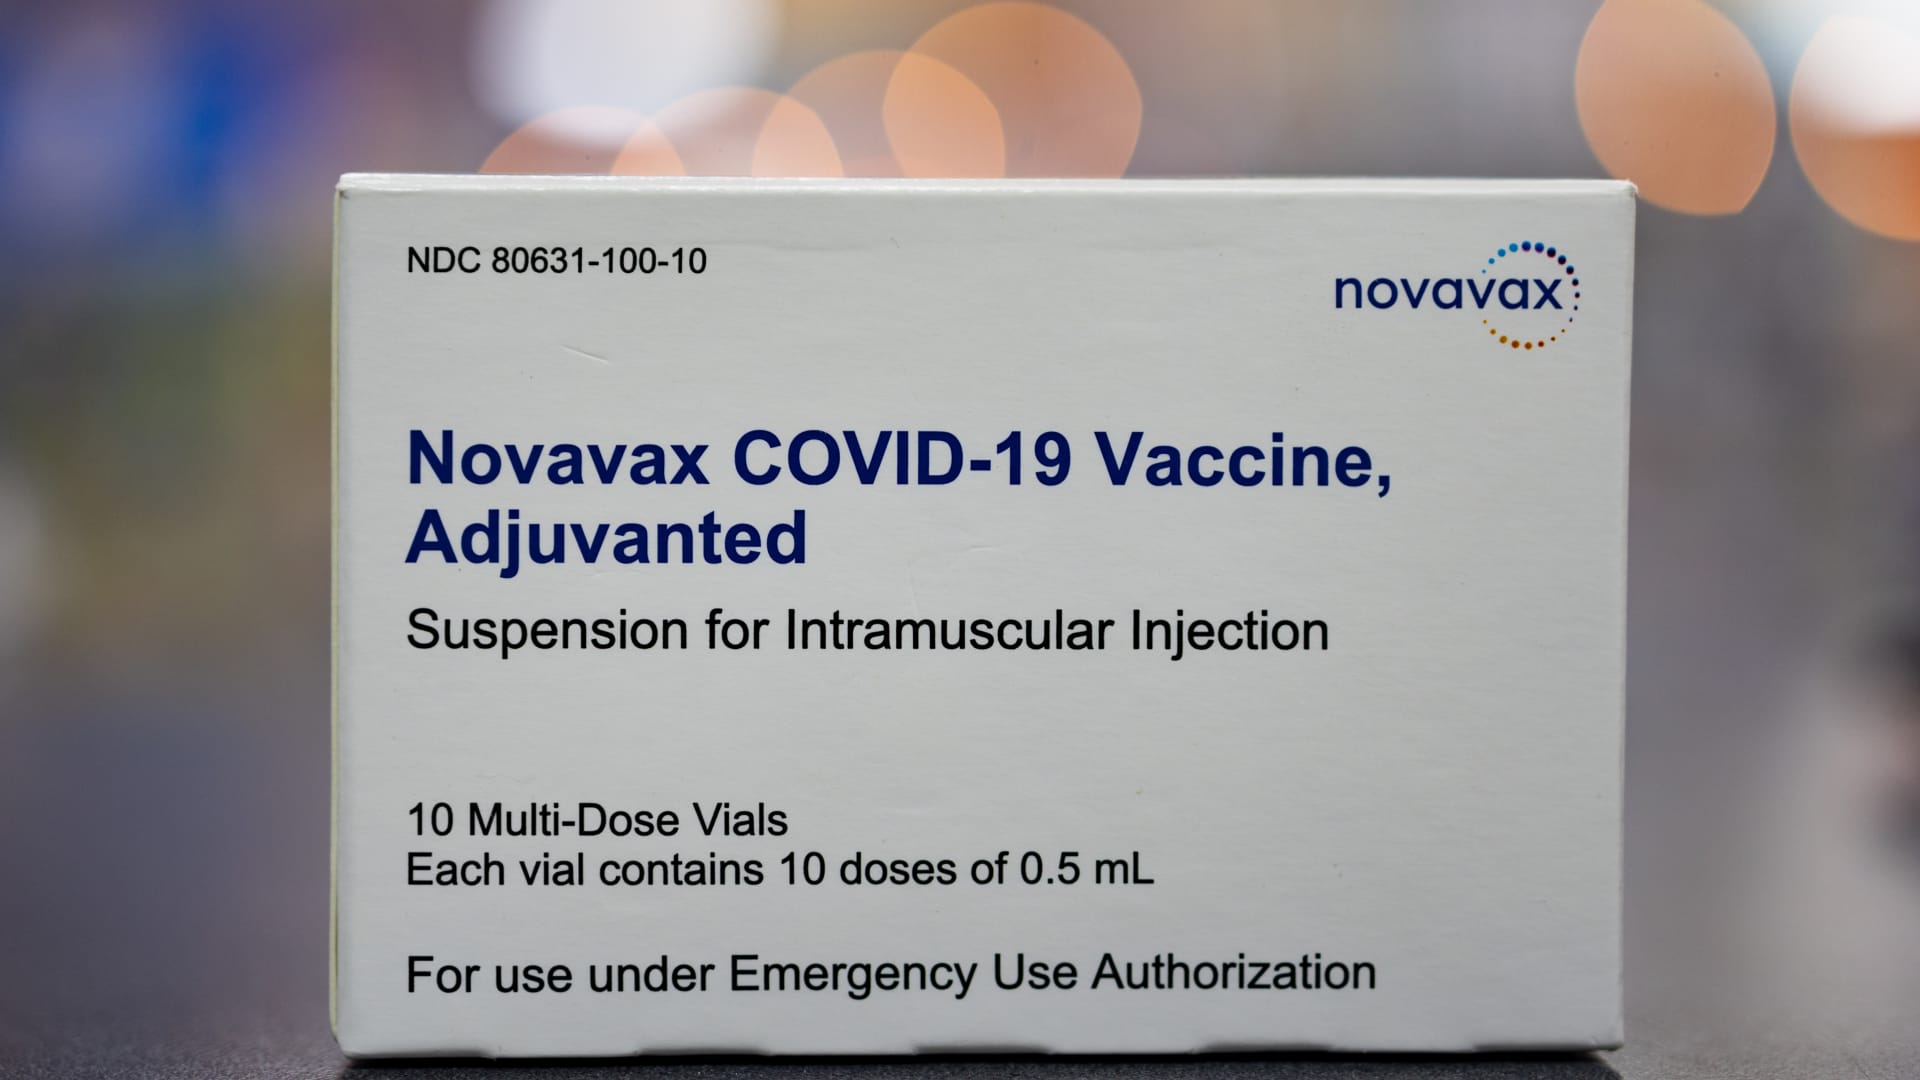 FDA authorizes emergency use for Novavax Covid-19 vaccine for ages 12 and 17